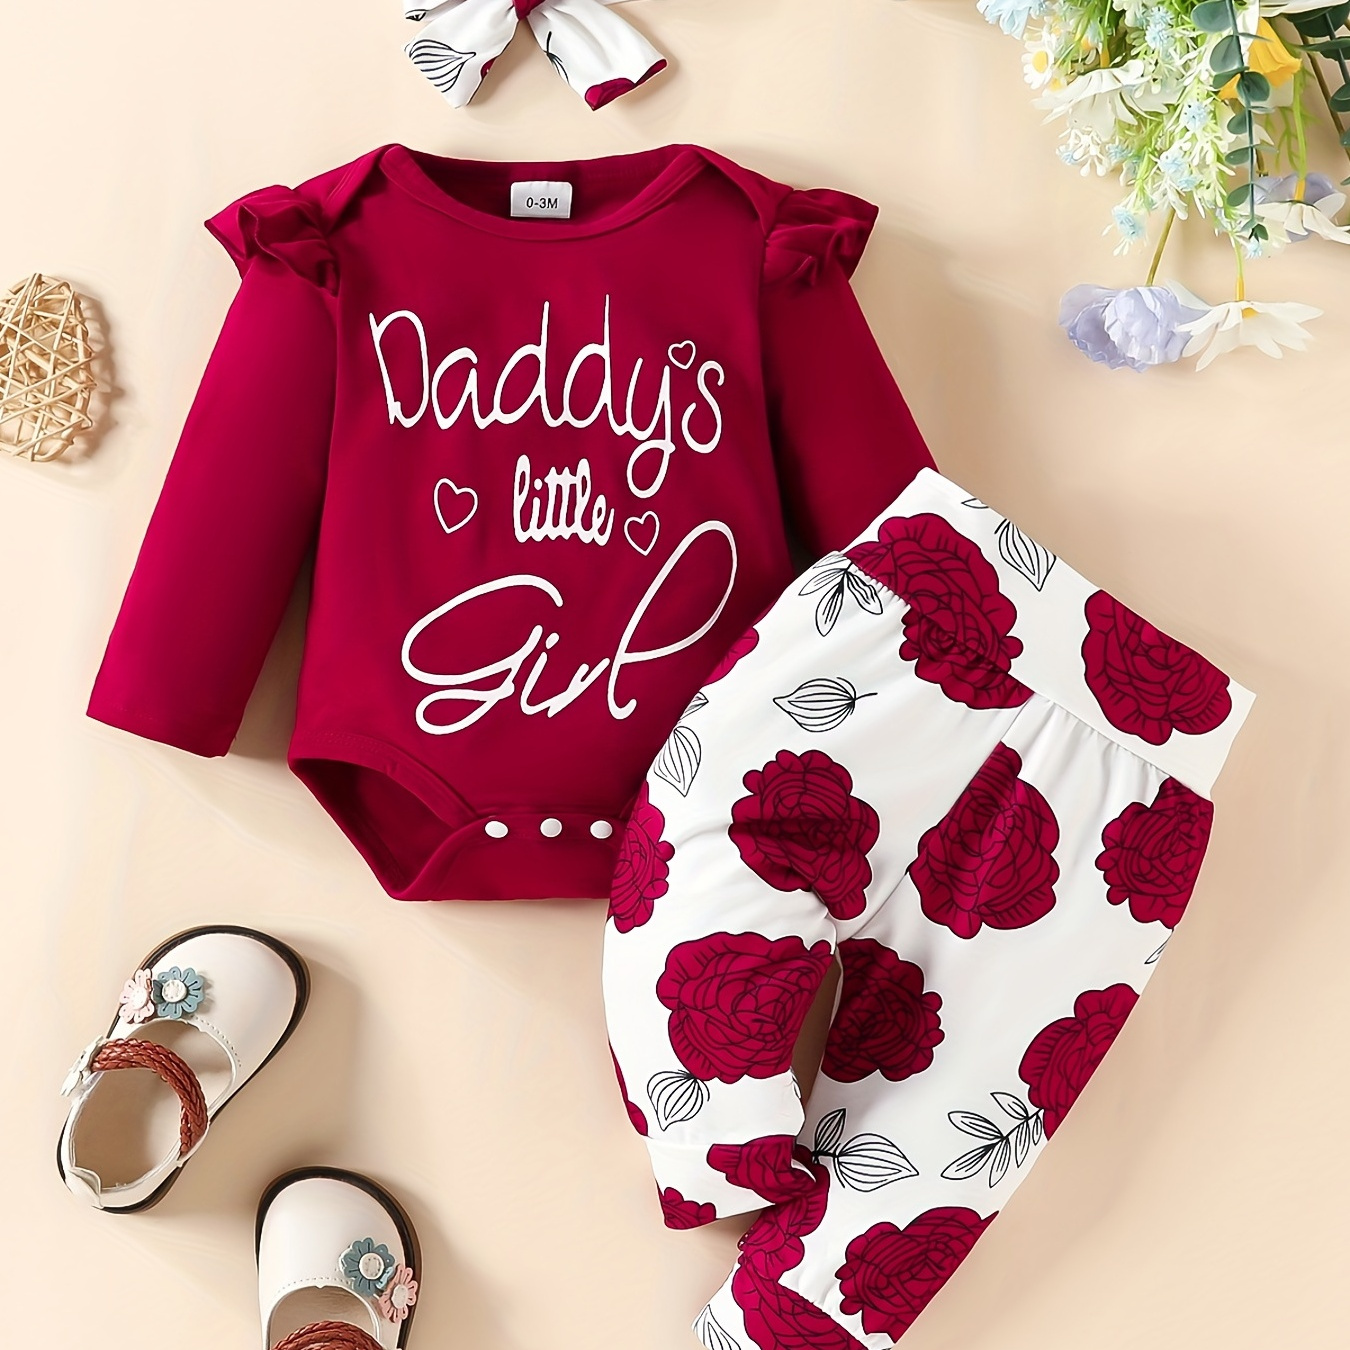 

3pcss Baby Cute Casual Outfits - Long Sleeve Top With Letter "daddy's Little Girl" + Floral Trousers +hairband Set, Infant Newborn Stylish Clothes